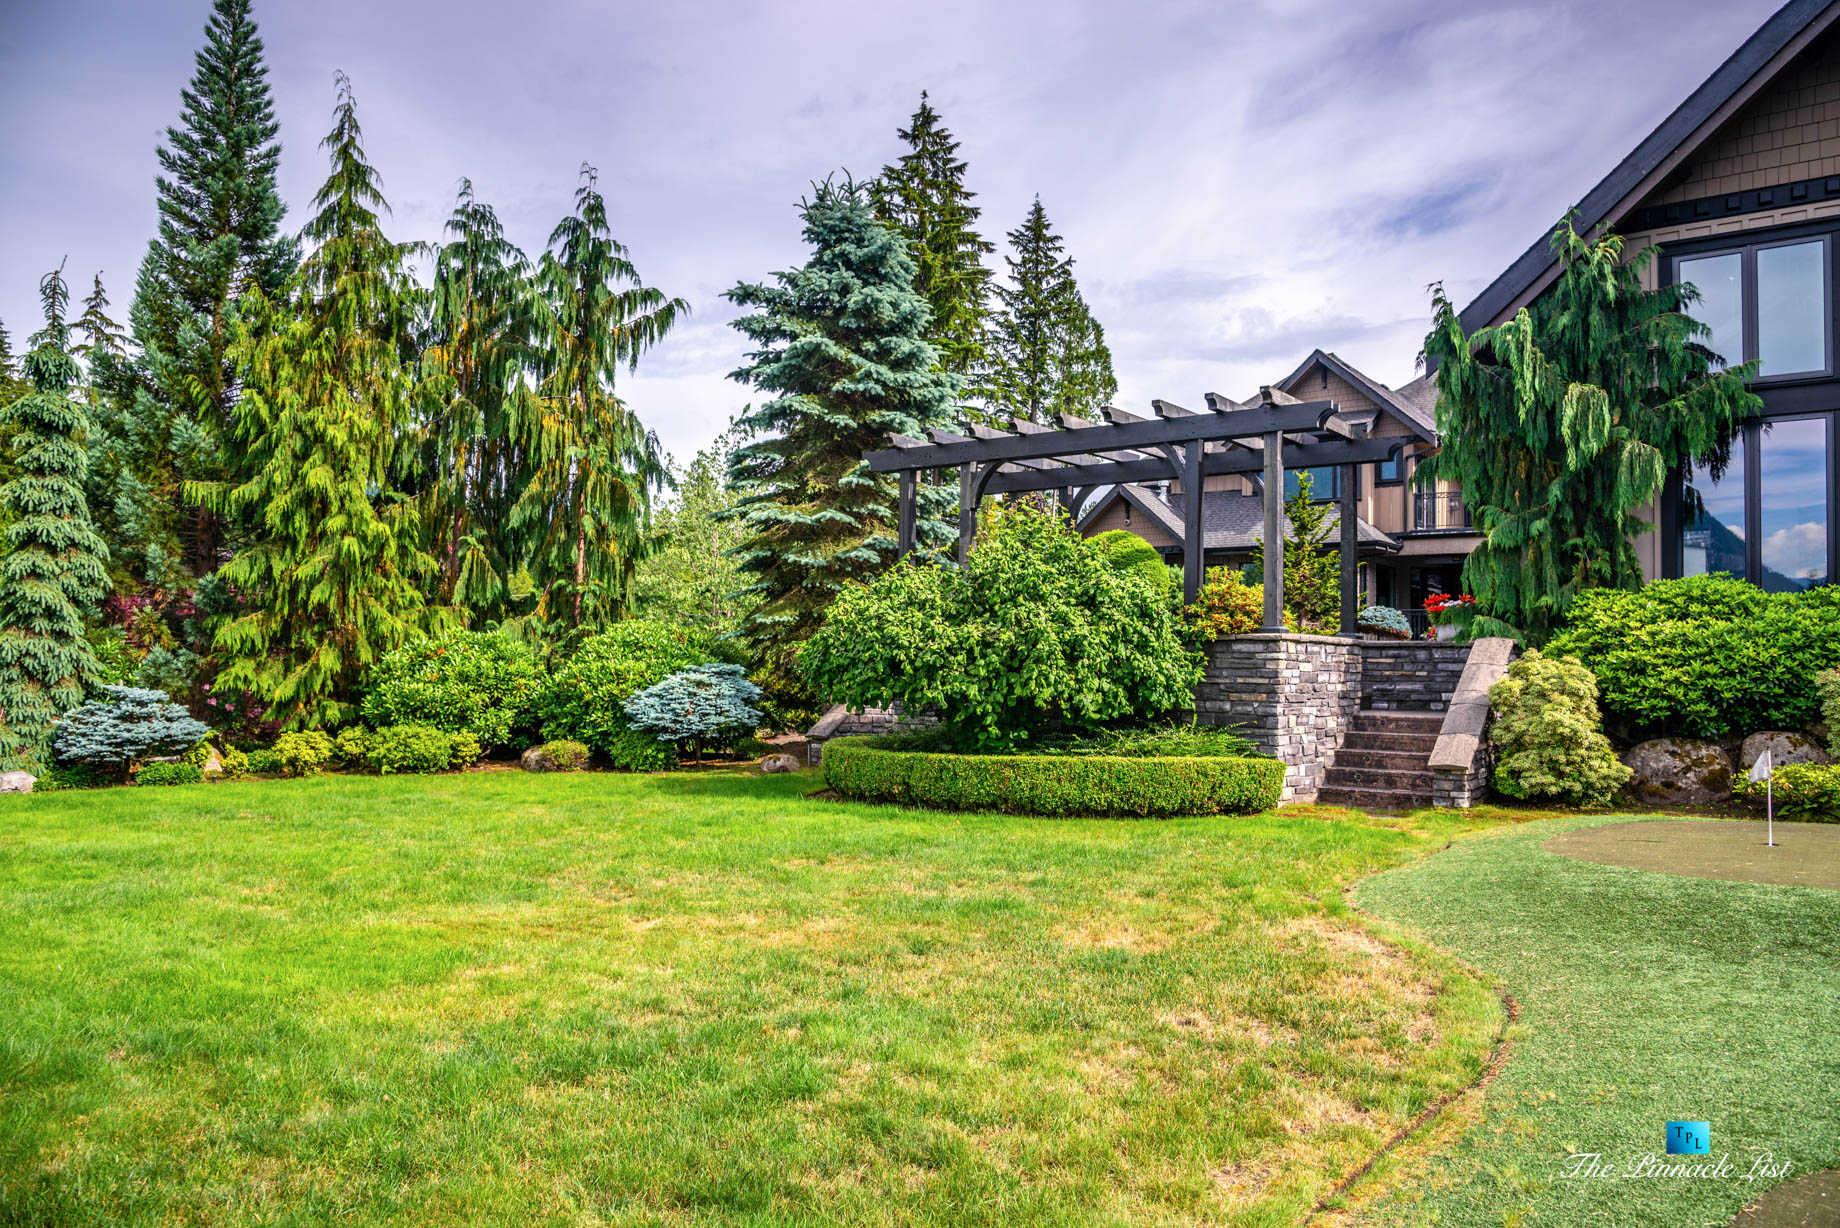 3053 Anmore Creek Way, Anmore, BC, Canada - Backyard Golf Putting Green and Landscaping - Luxury Real Estate - Greater Vancouver Home